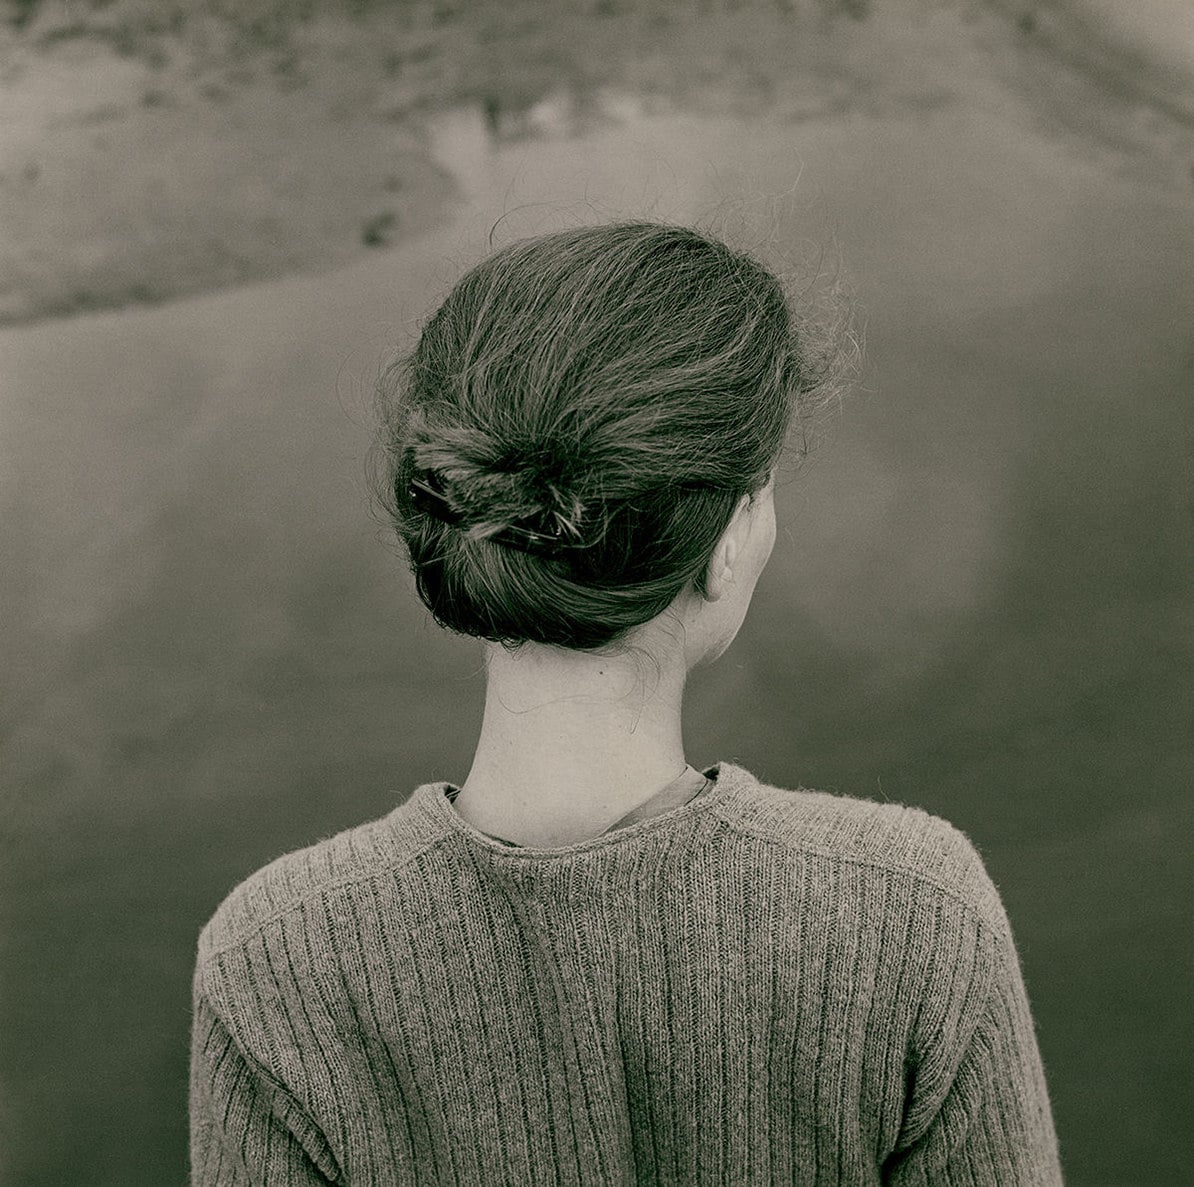 Emmet Gowin, a world of intimate perceptions